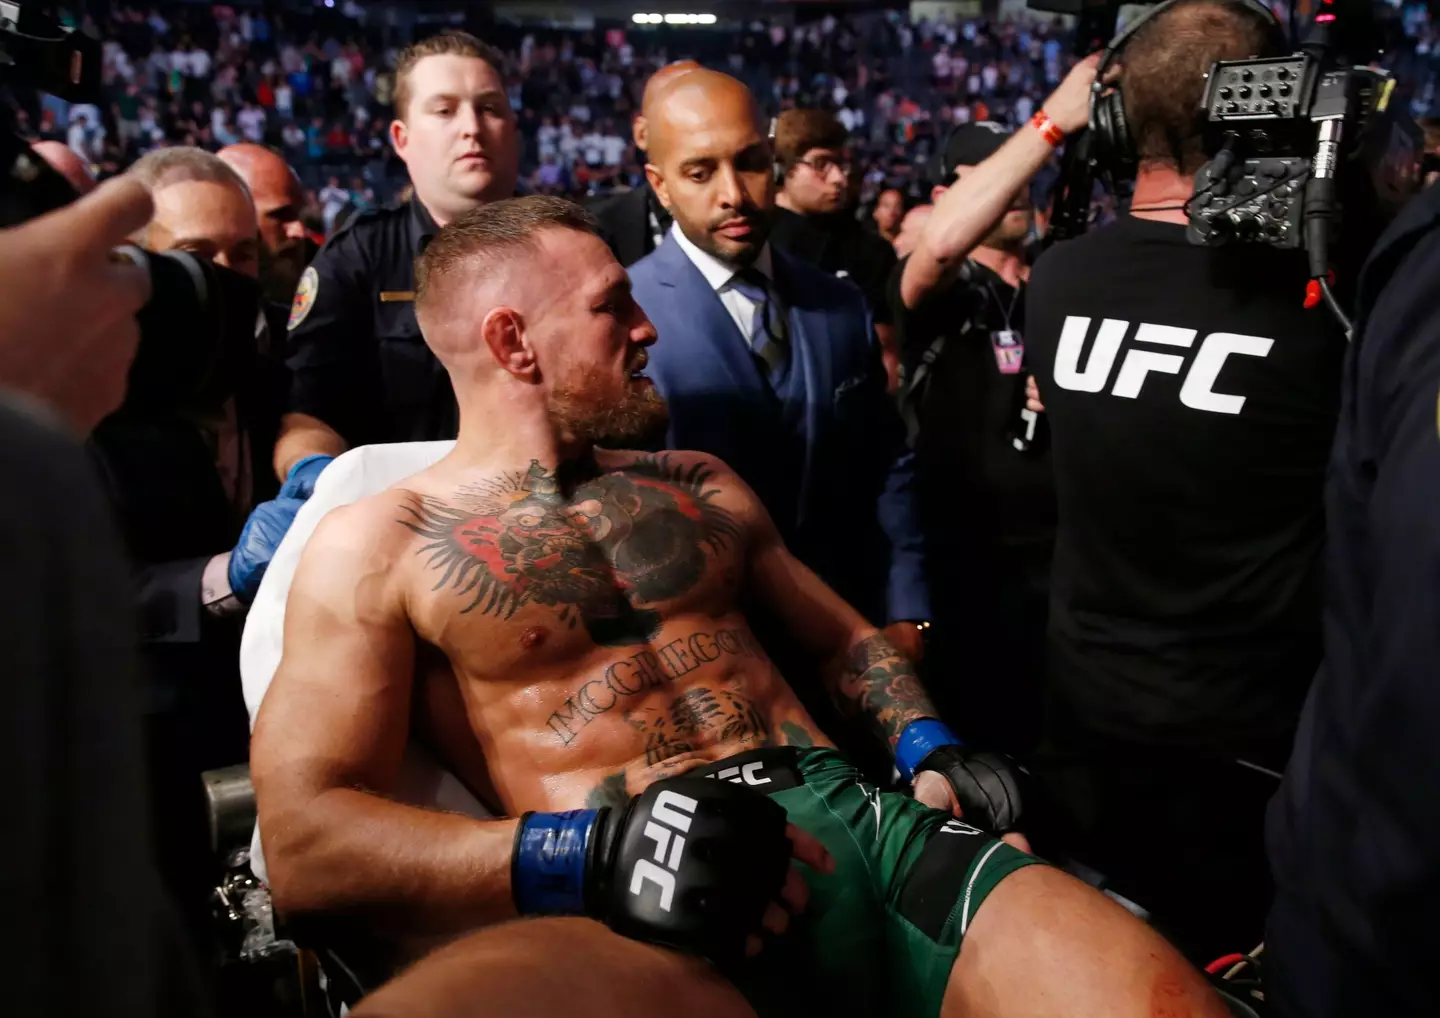 McGregor being stretchered out of his fight with Poirier in 2021. (Image